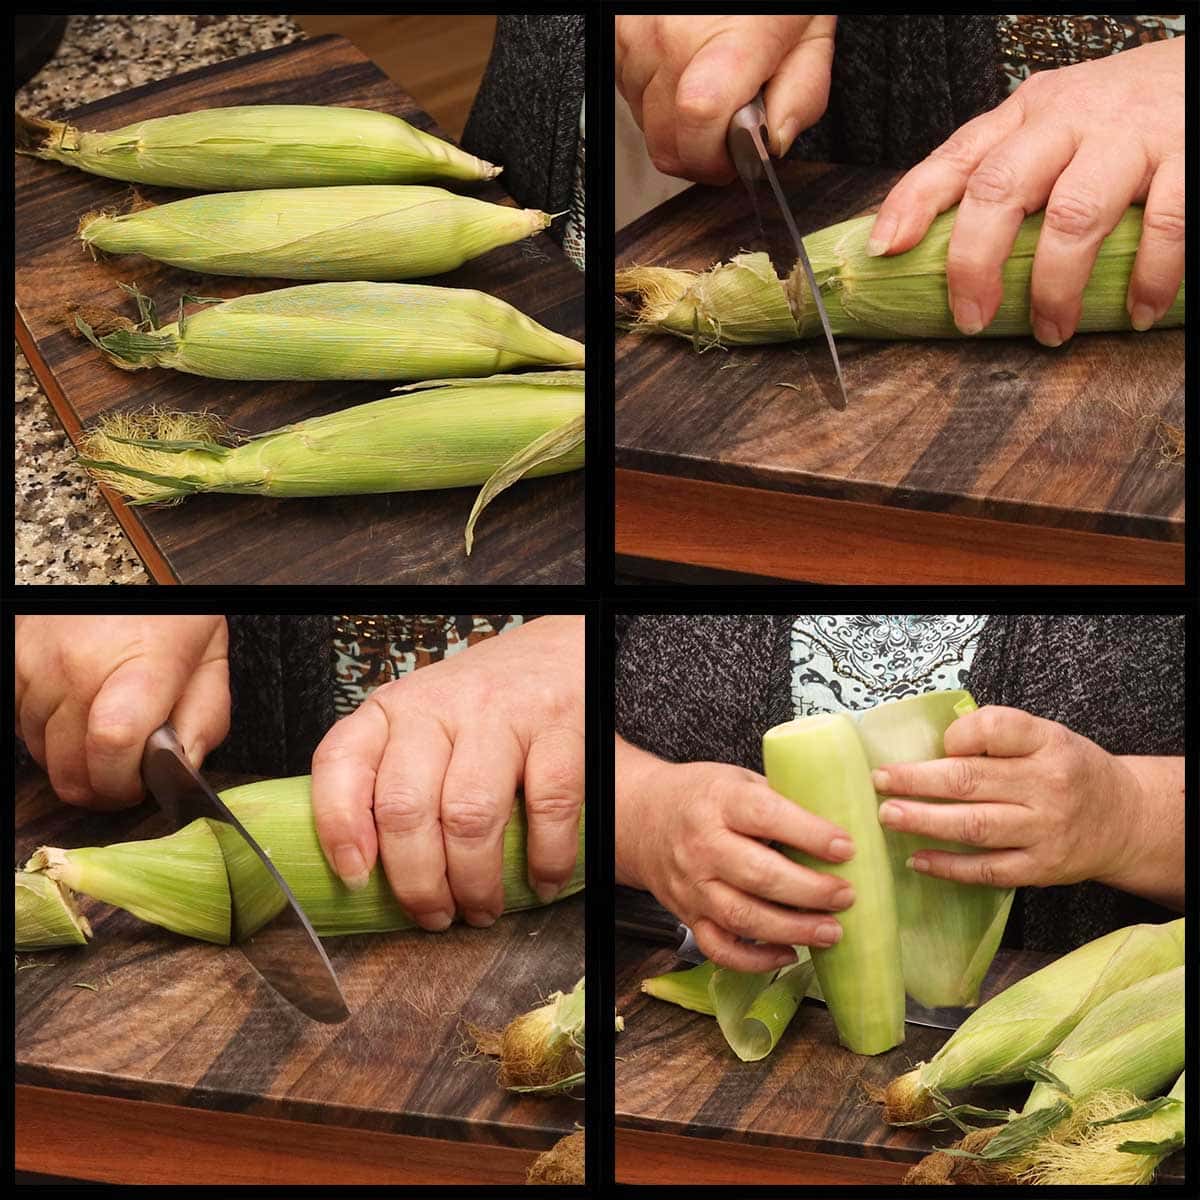 preparing the corn by cutting off the ends and removing 2-3 layers of the husk before pressure cooking.